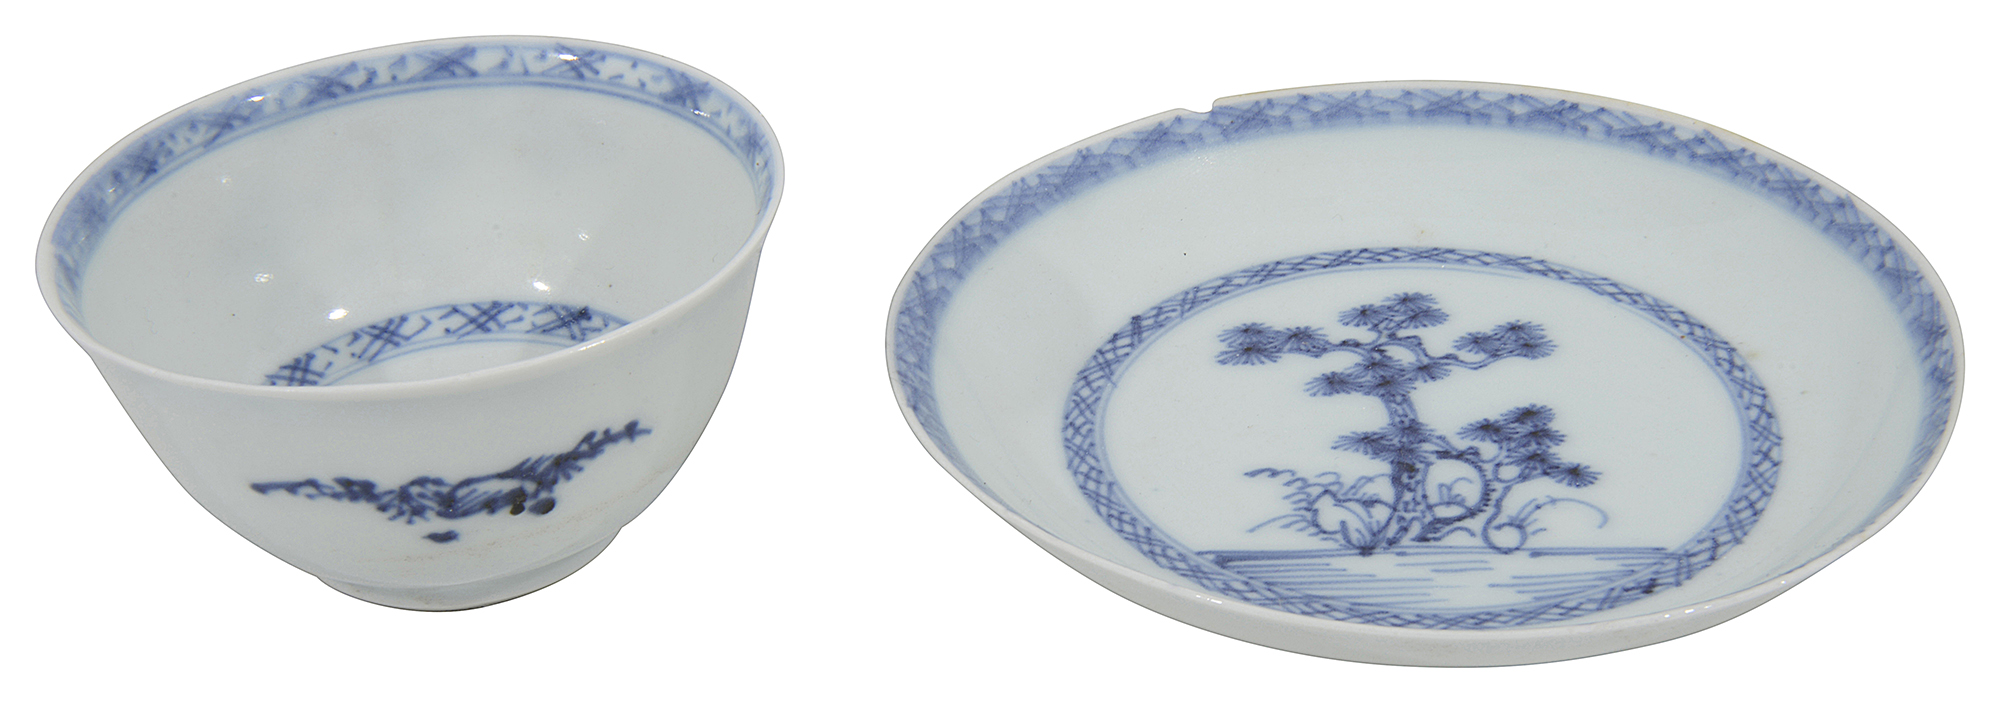 A Nanking Cargo blue and white tea bowl and saucer c.1750